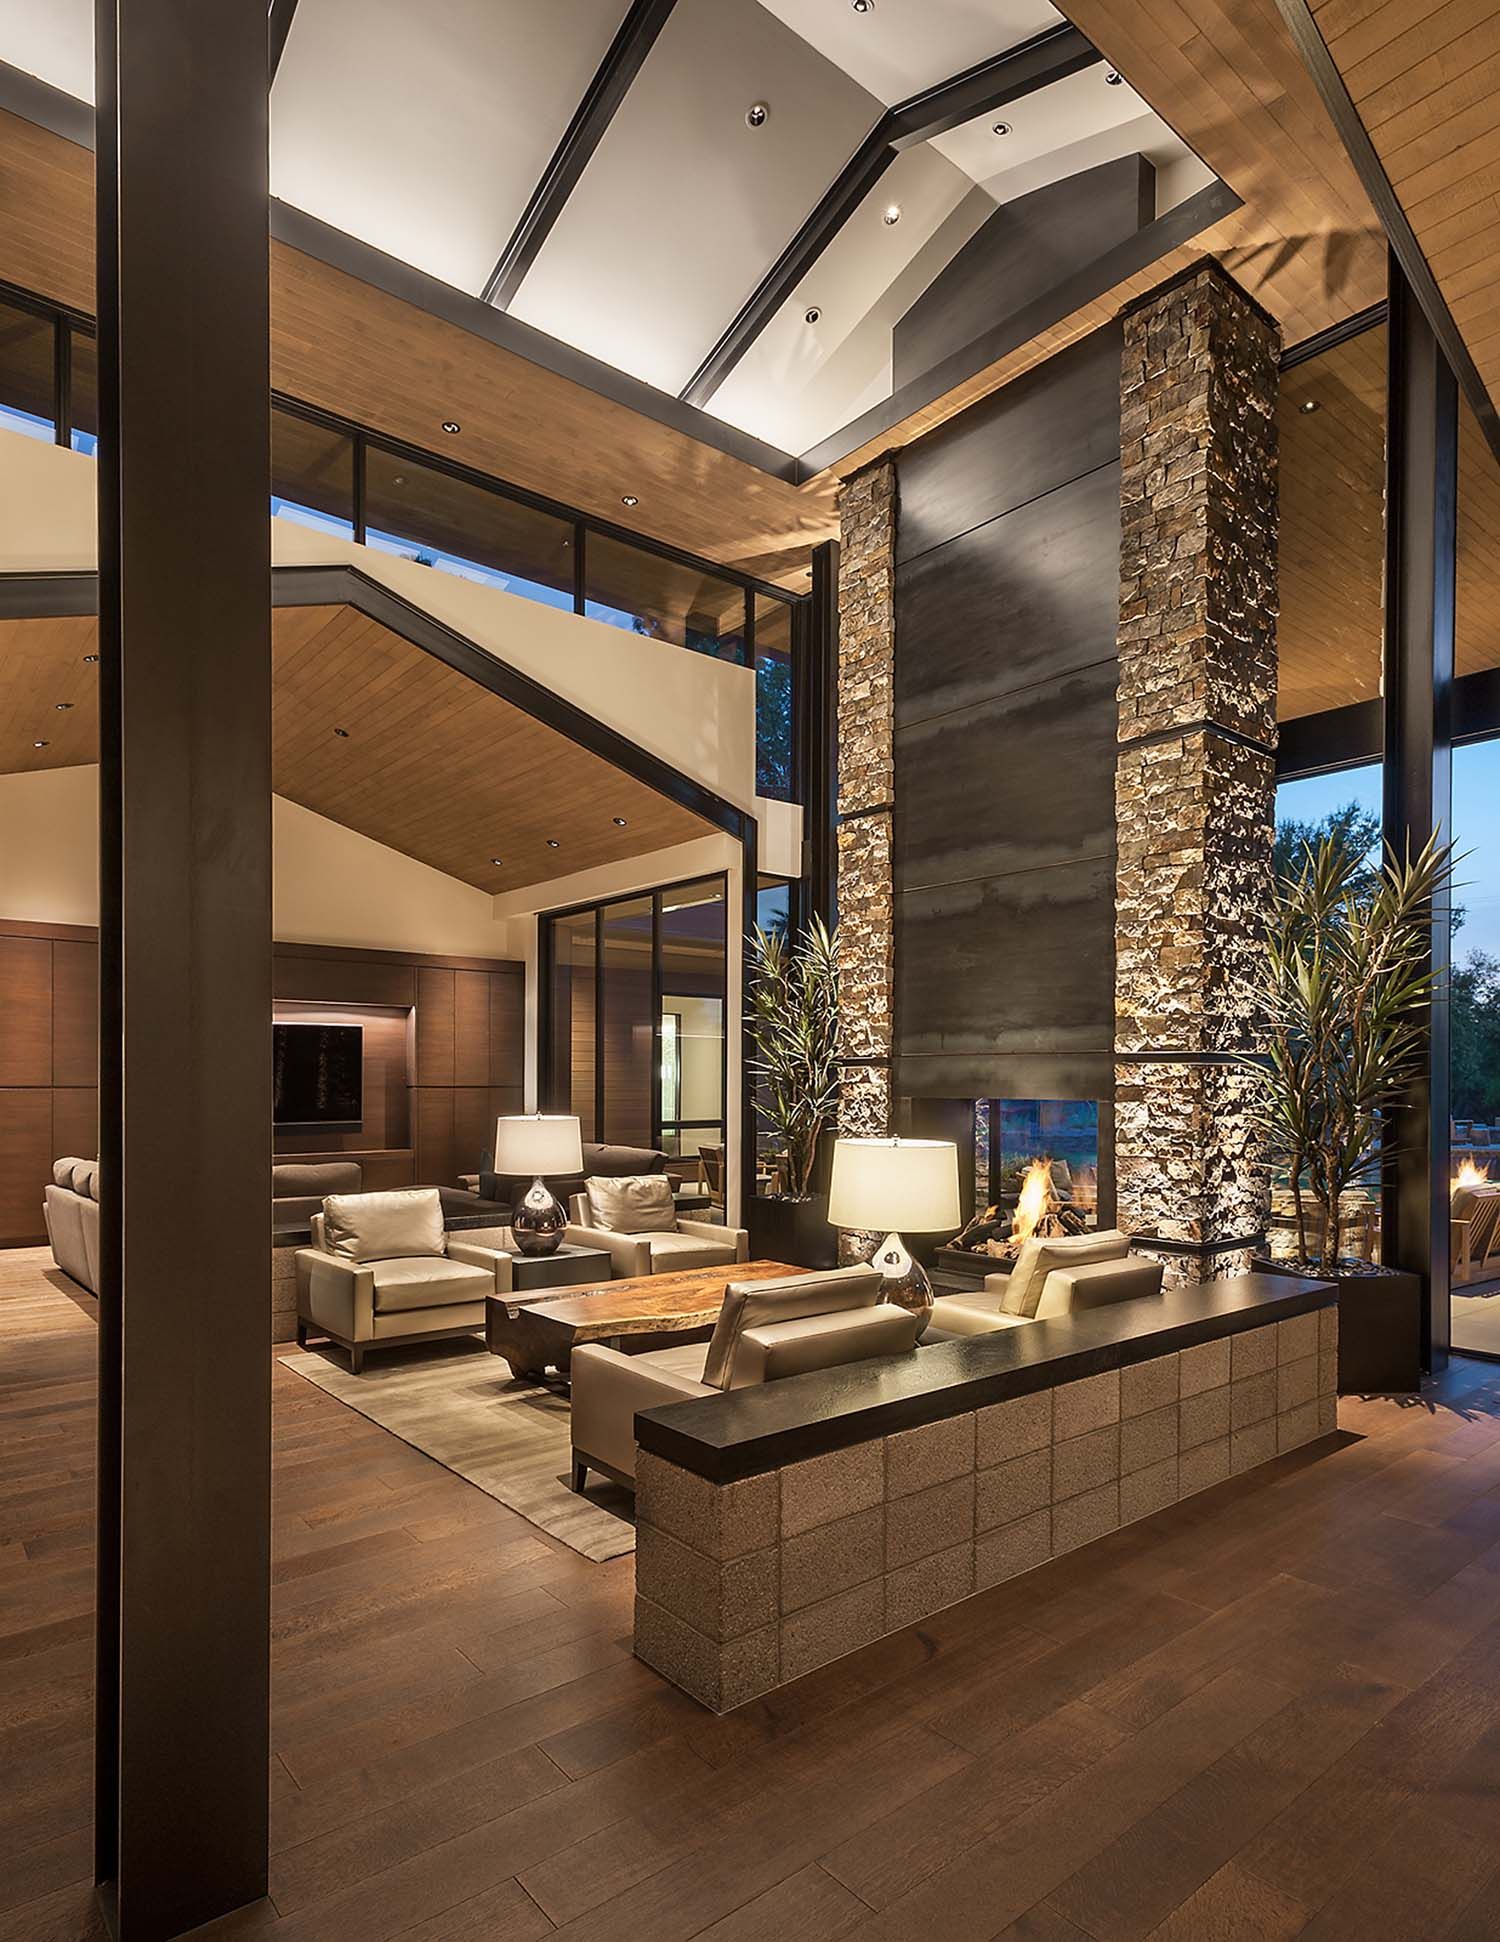 Walls of glass defines Arizona home re-imagined for a modern ...